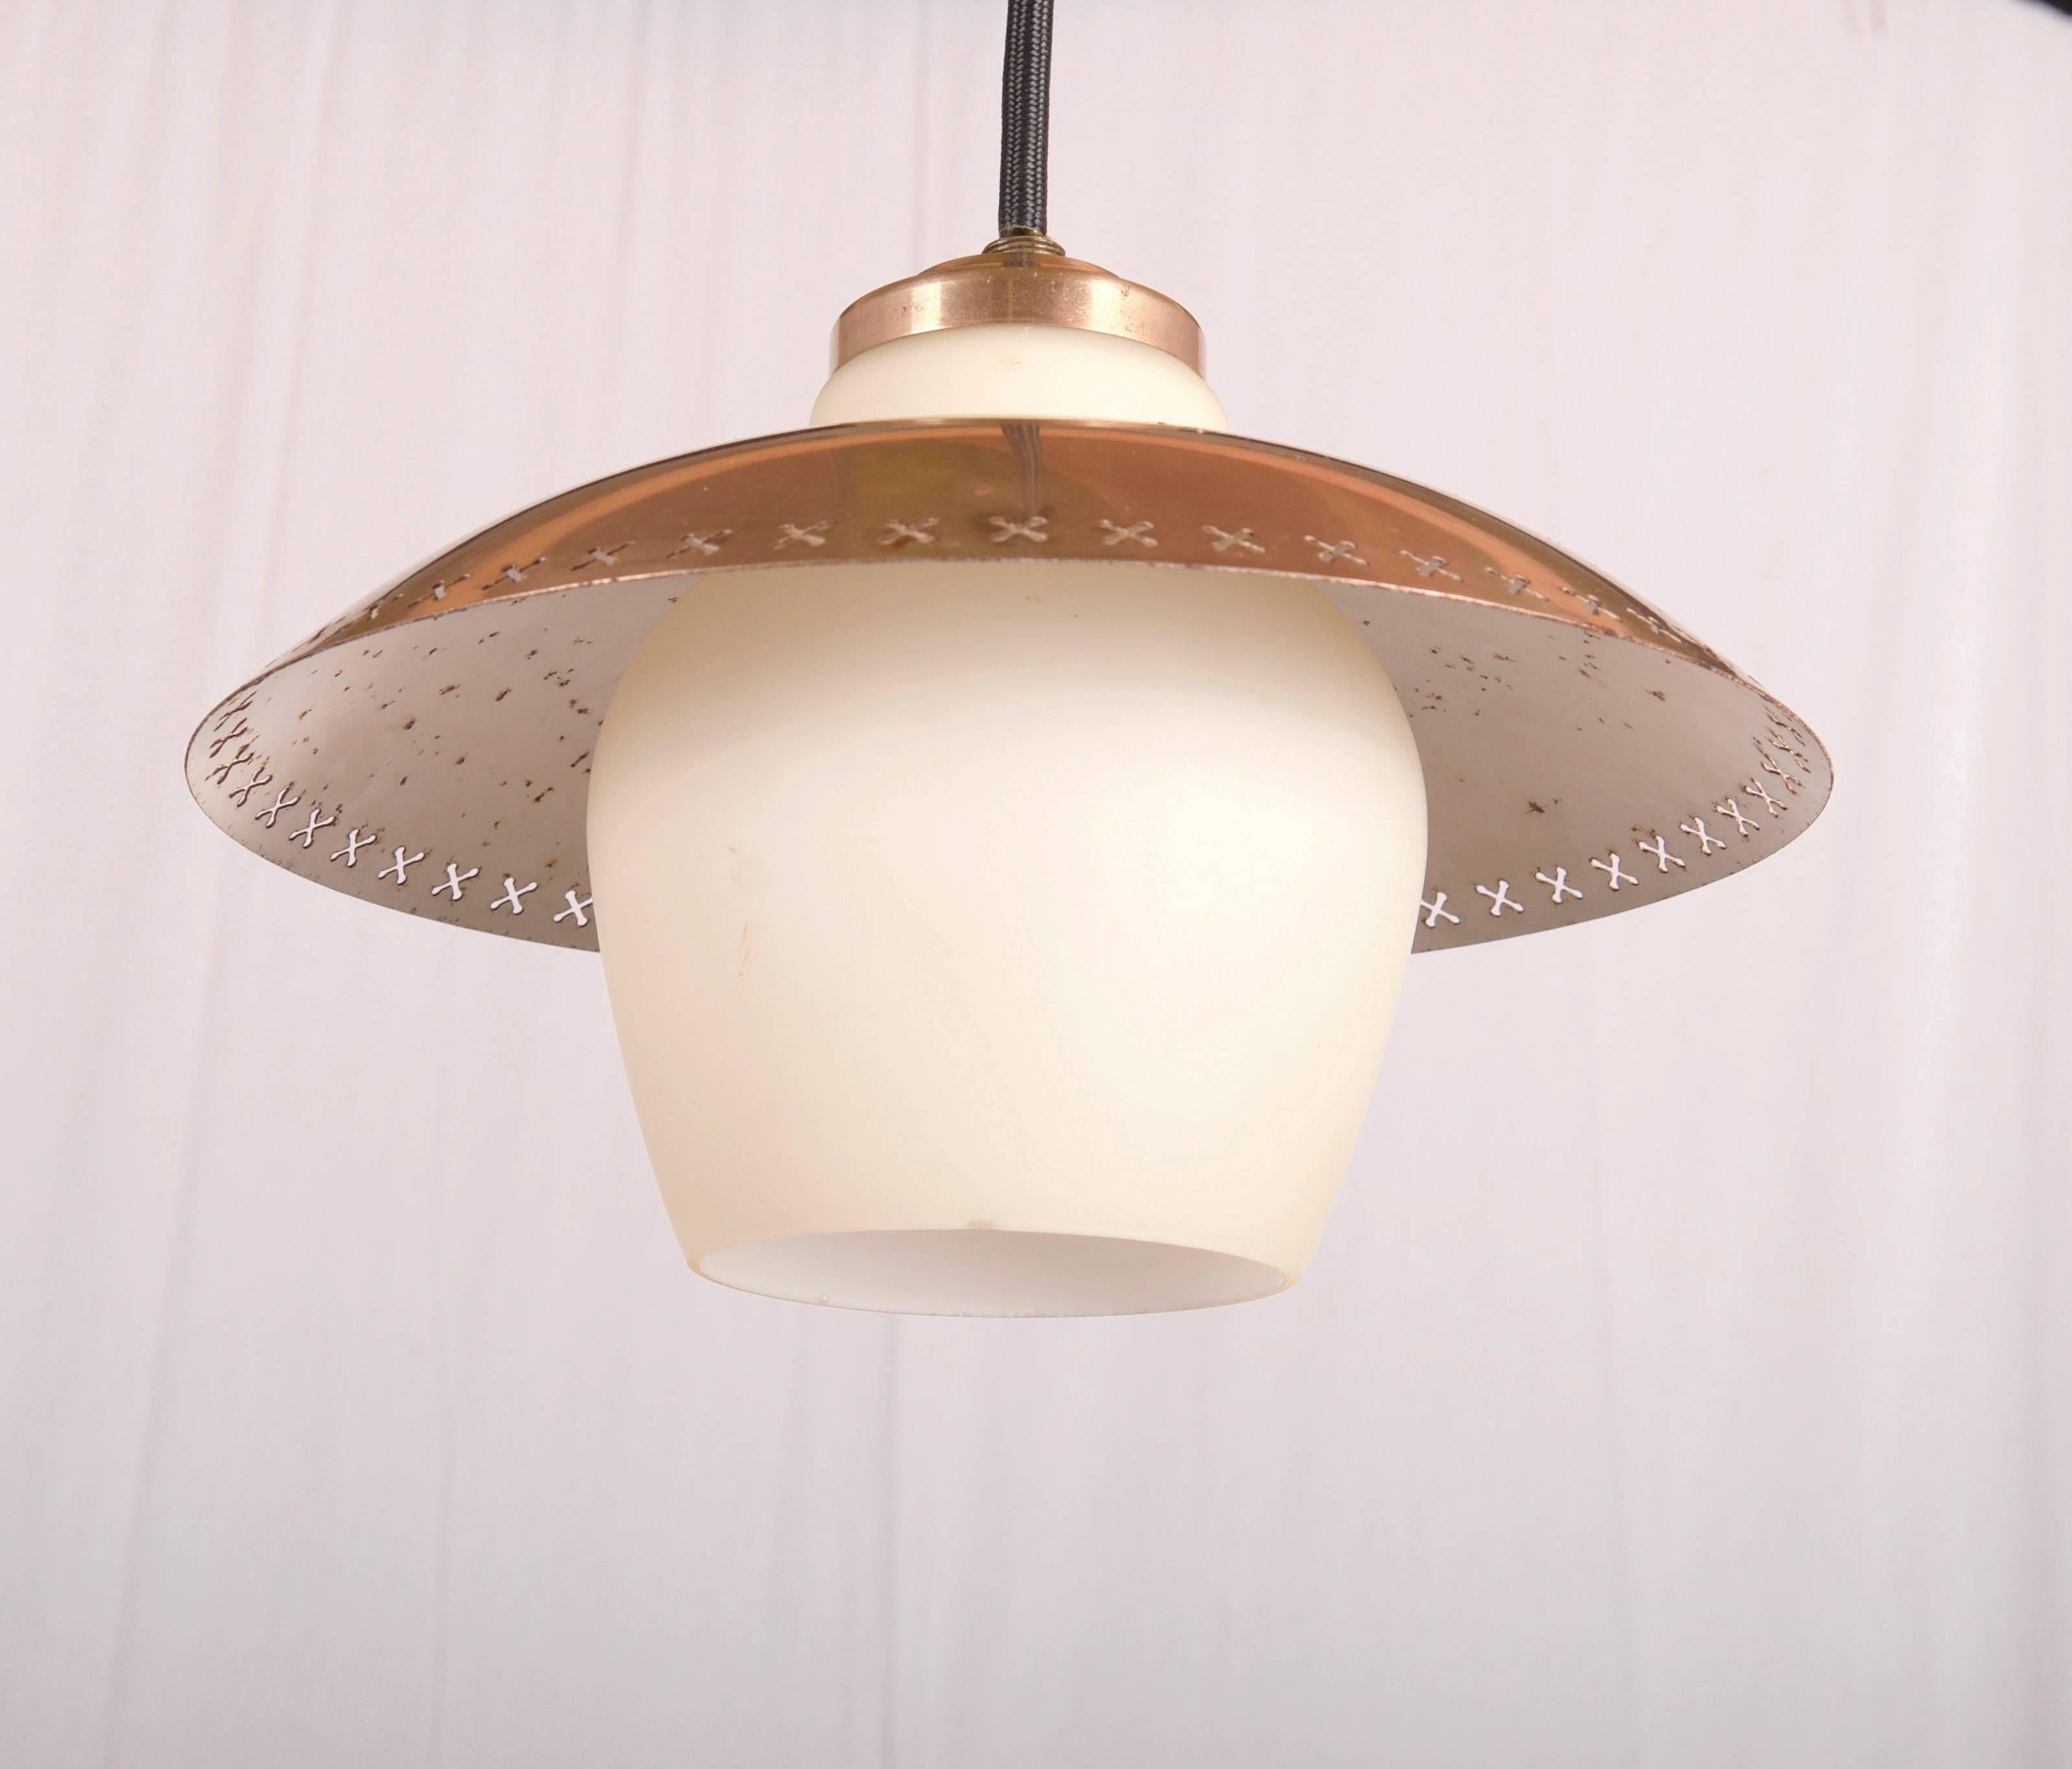 Opaline glass shade with brass element, fitted with one E27 socket.
Designed by Bent Karlby and made by Fog & Mørup in the 1950s.